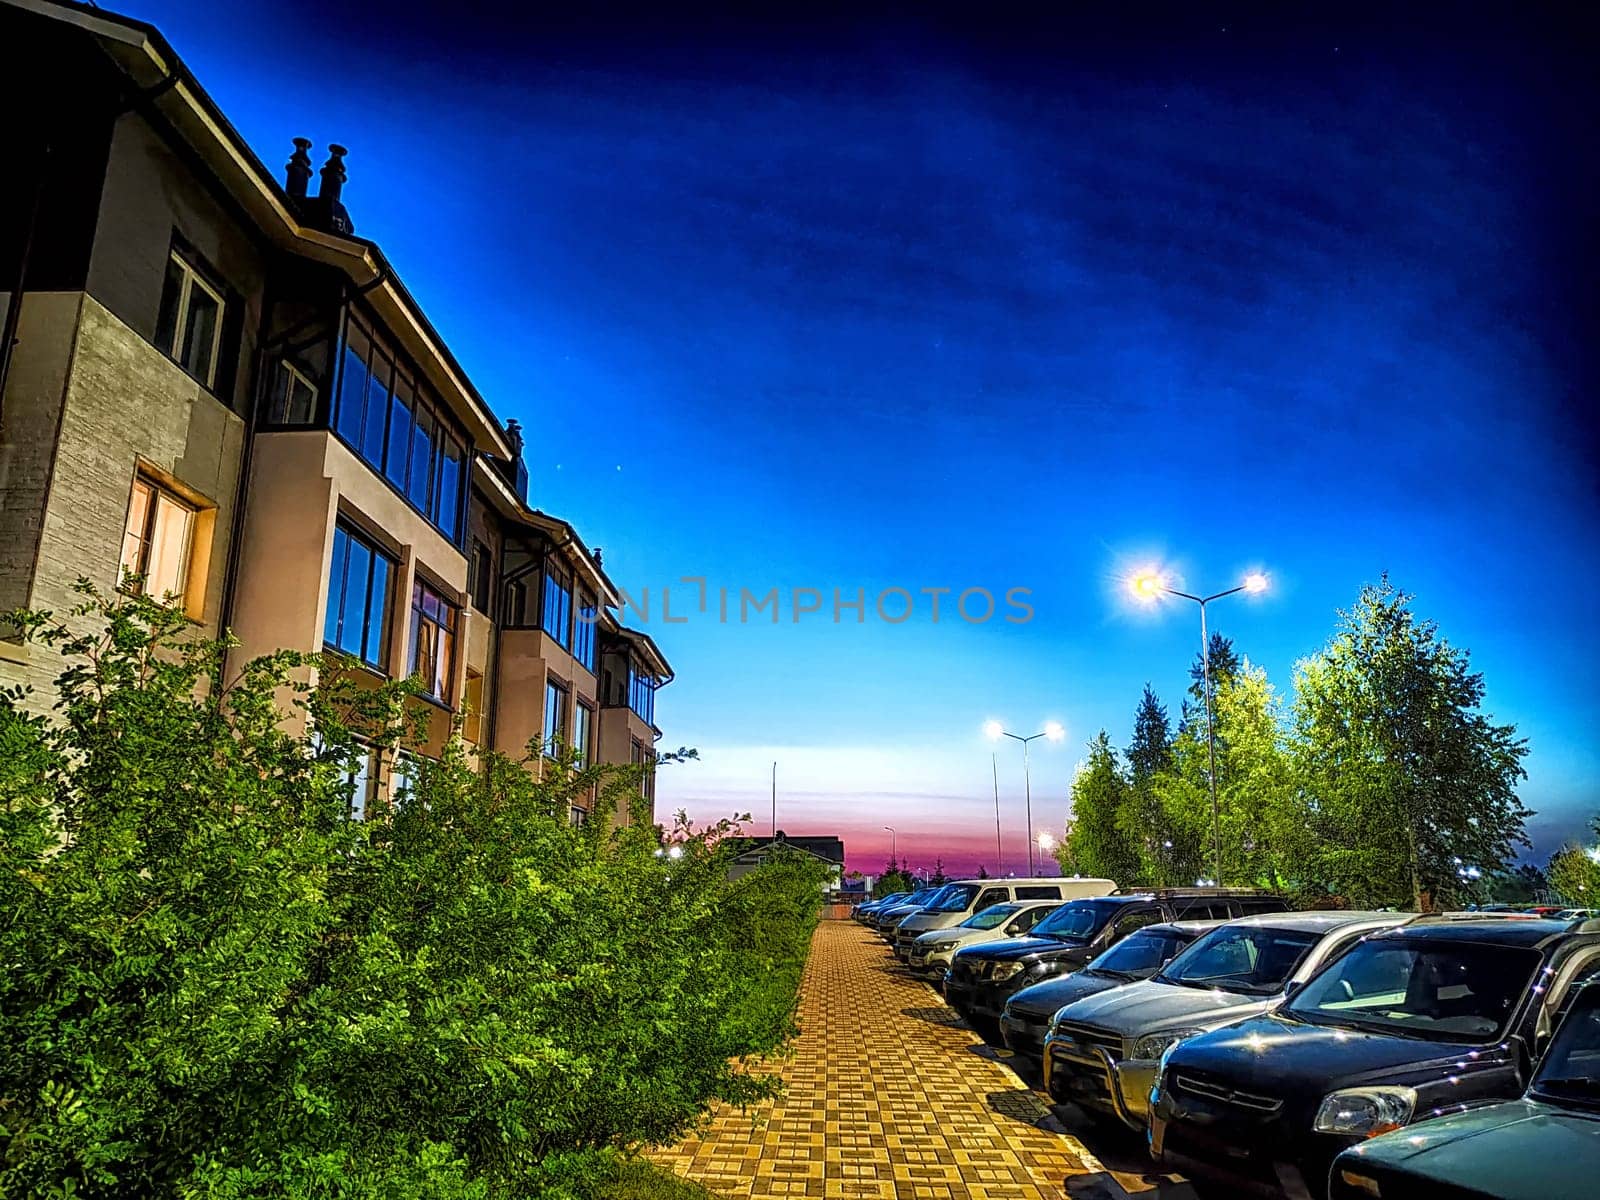 Night, village, houses and cars in the parking lot. Photography is like painting. Serene Village Nightfall With Parked Cars and Illuminated Homes